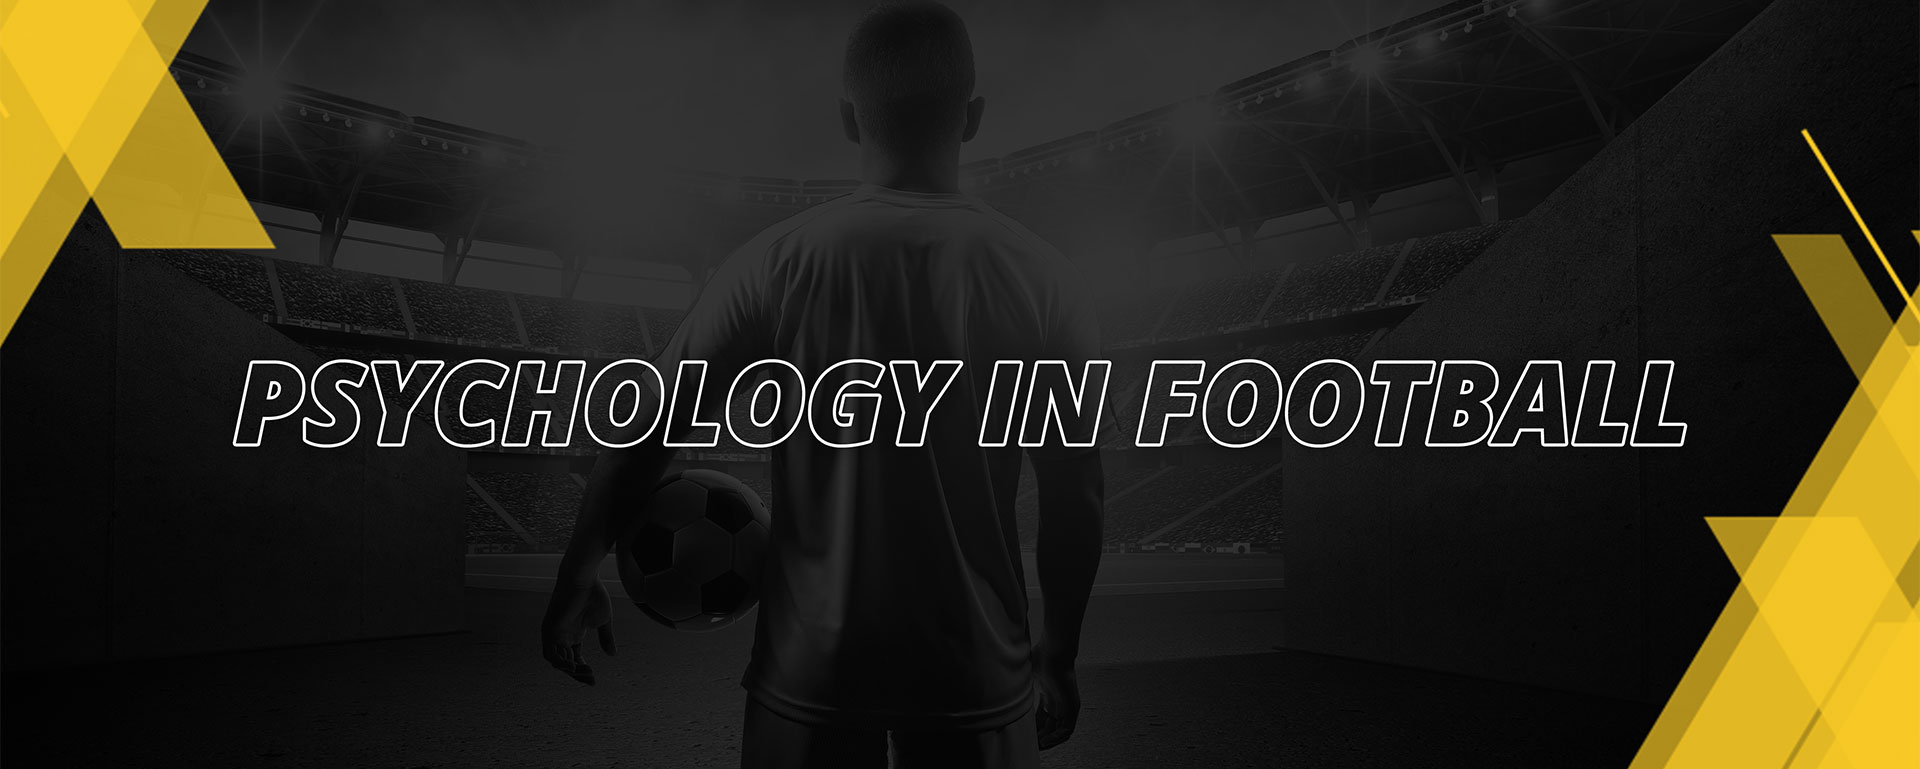 PSYCHOLOGY IN FOOTBALL